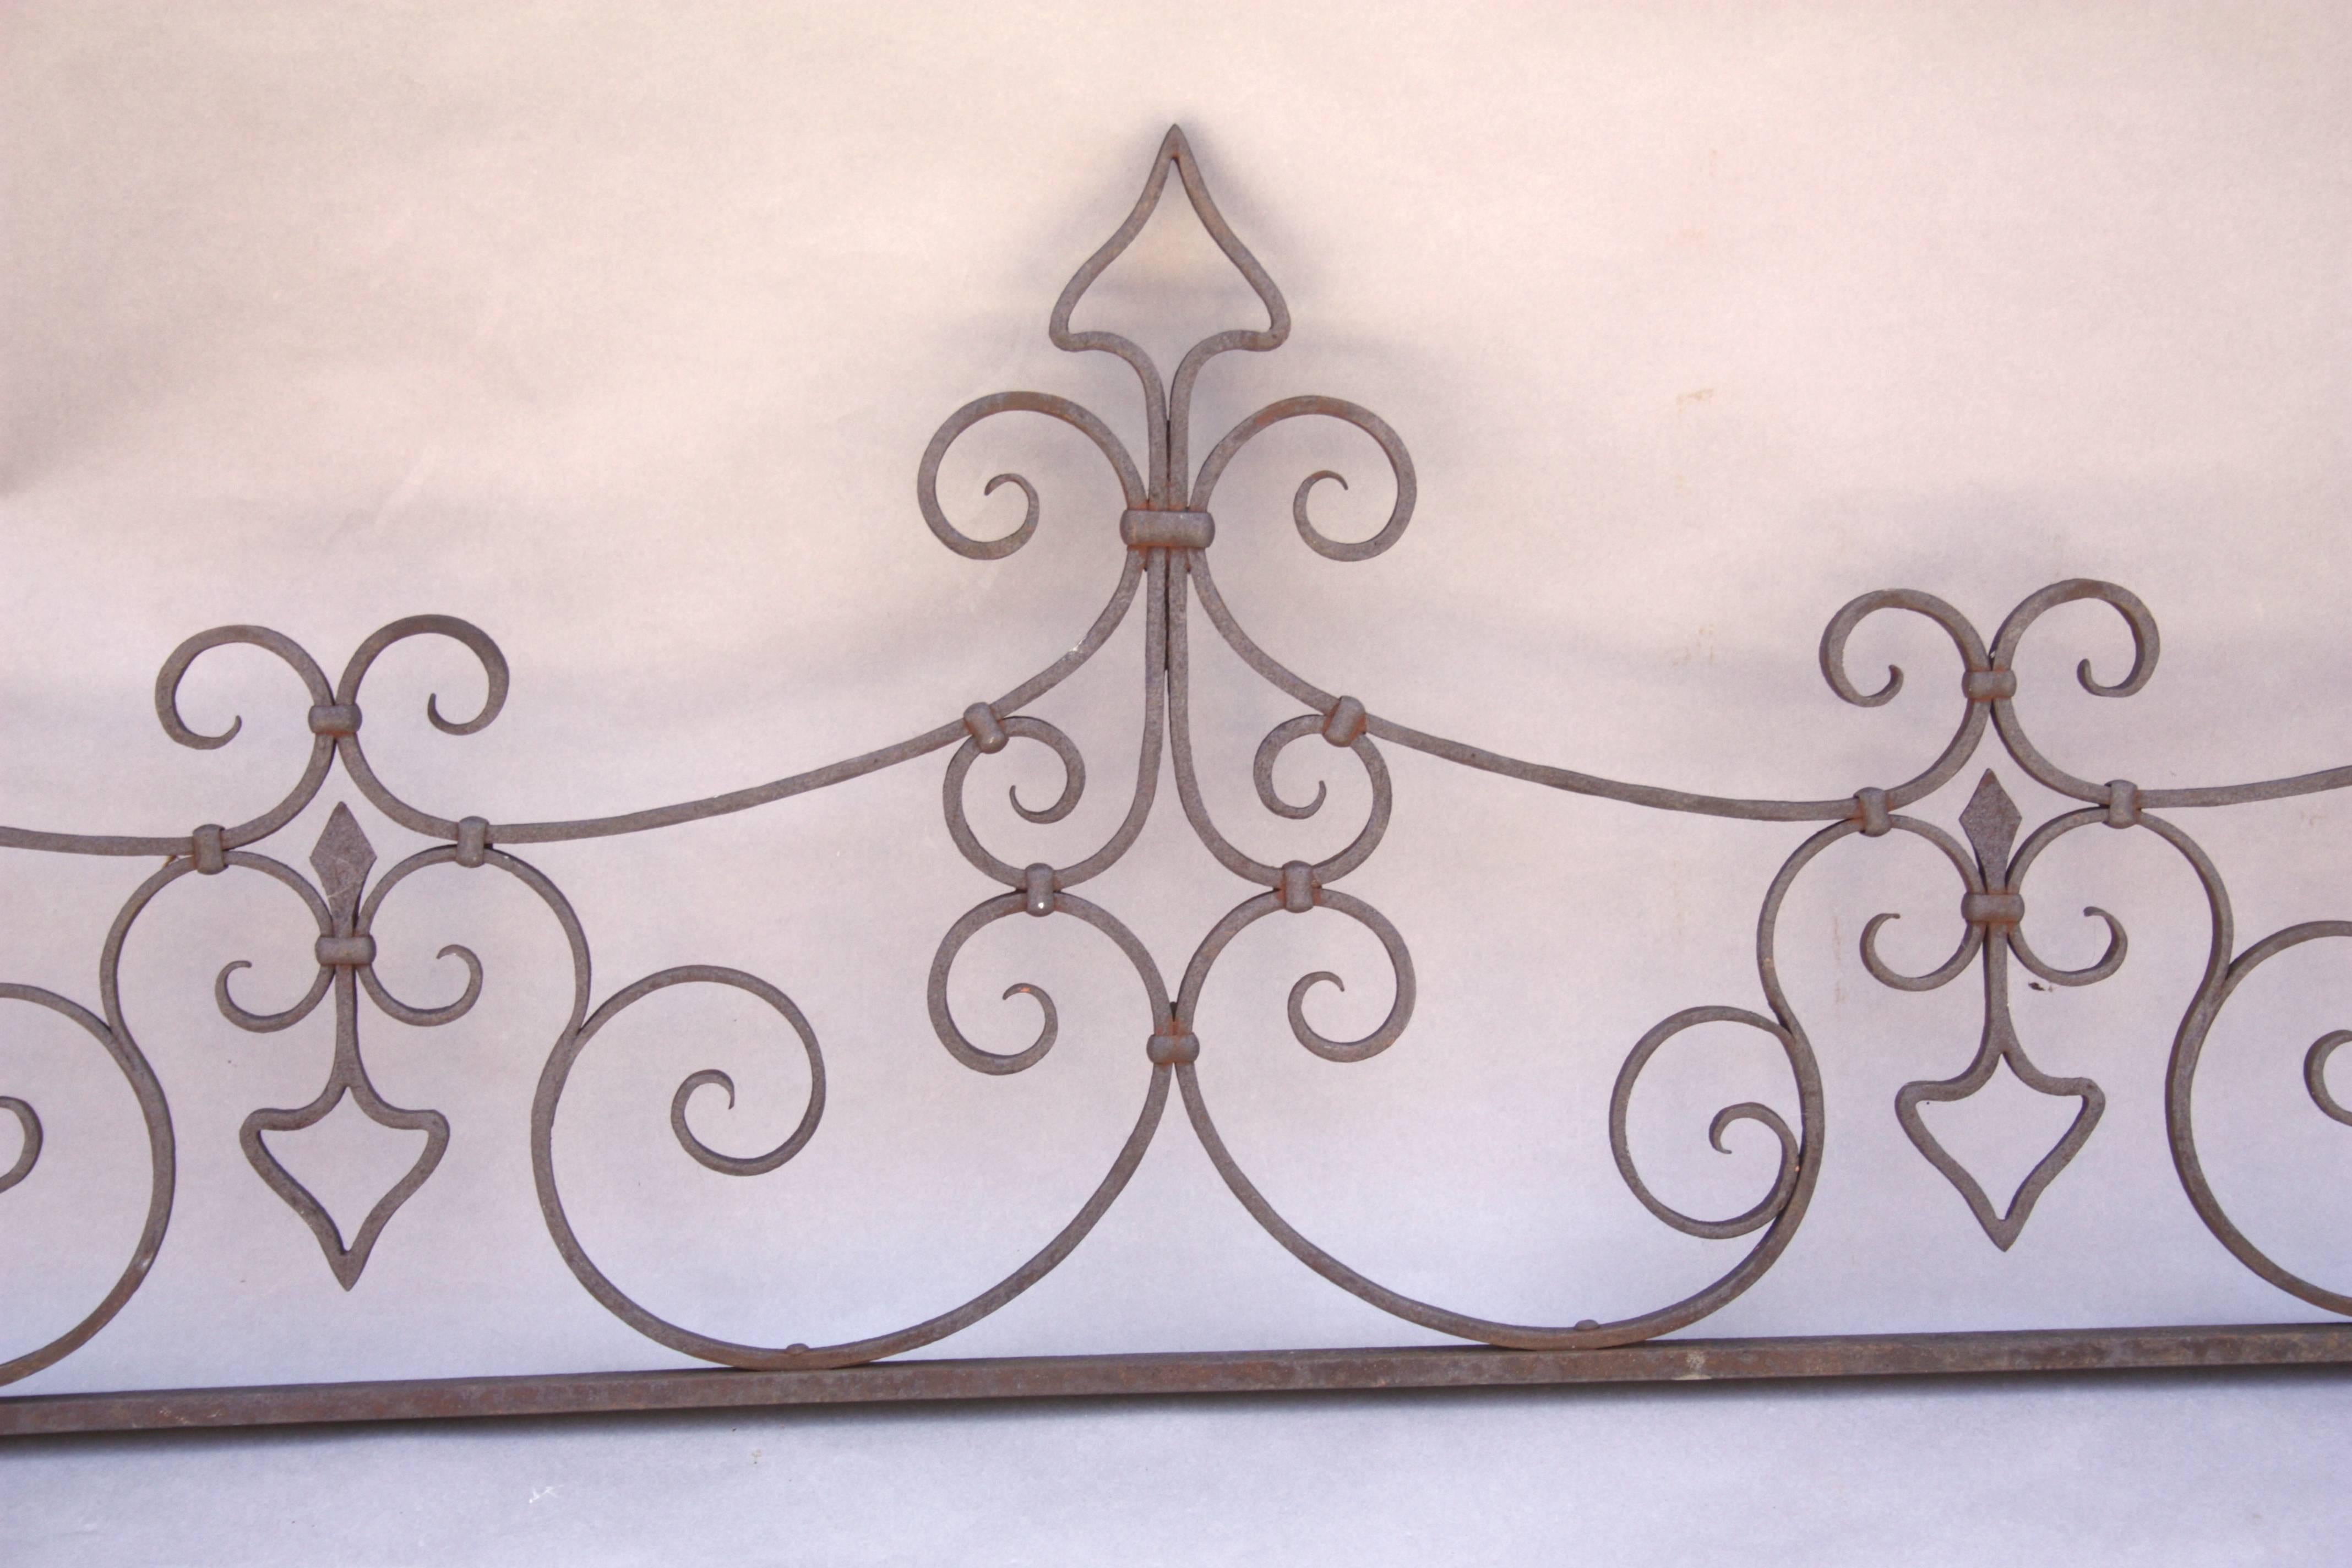 Spanish Colonial Spanish Revival Wrought Iron Decorative Element For Sale